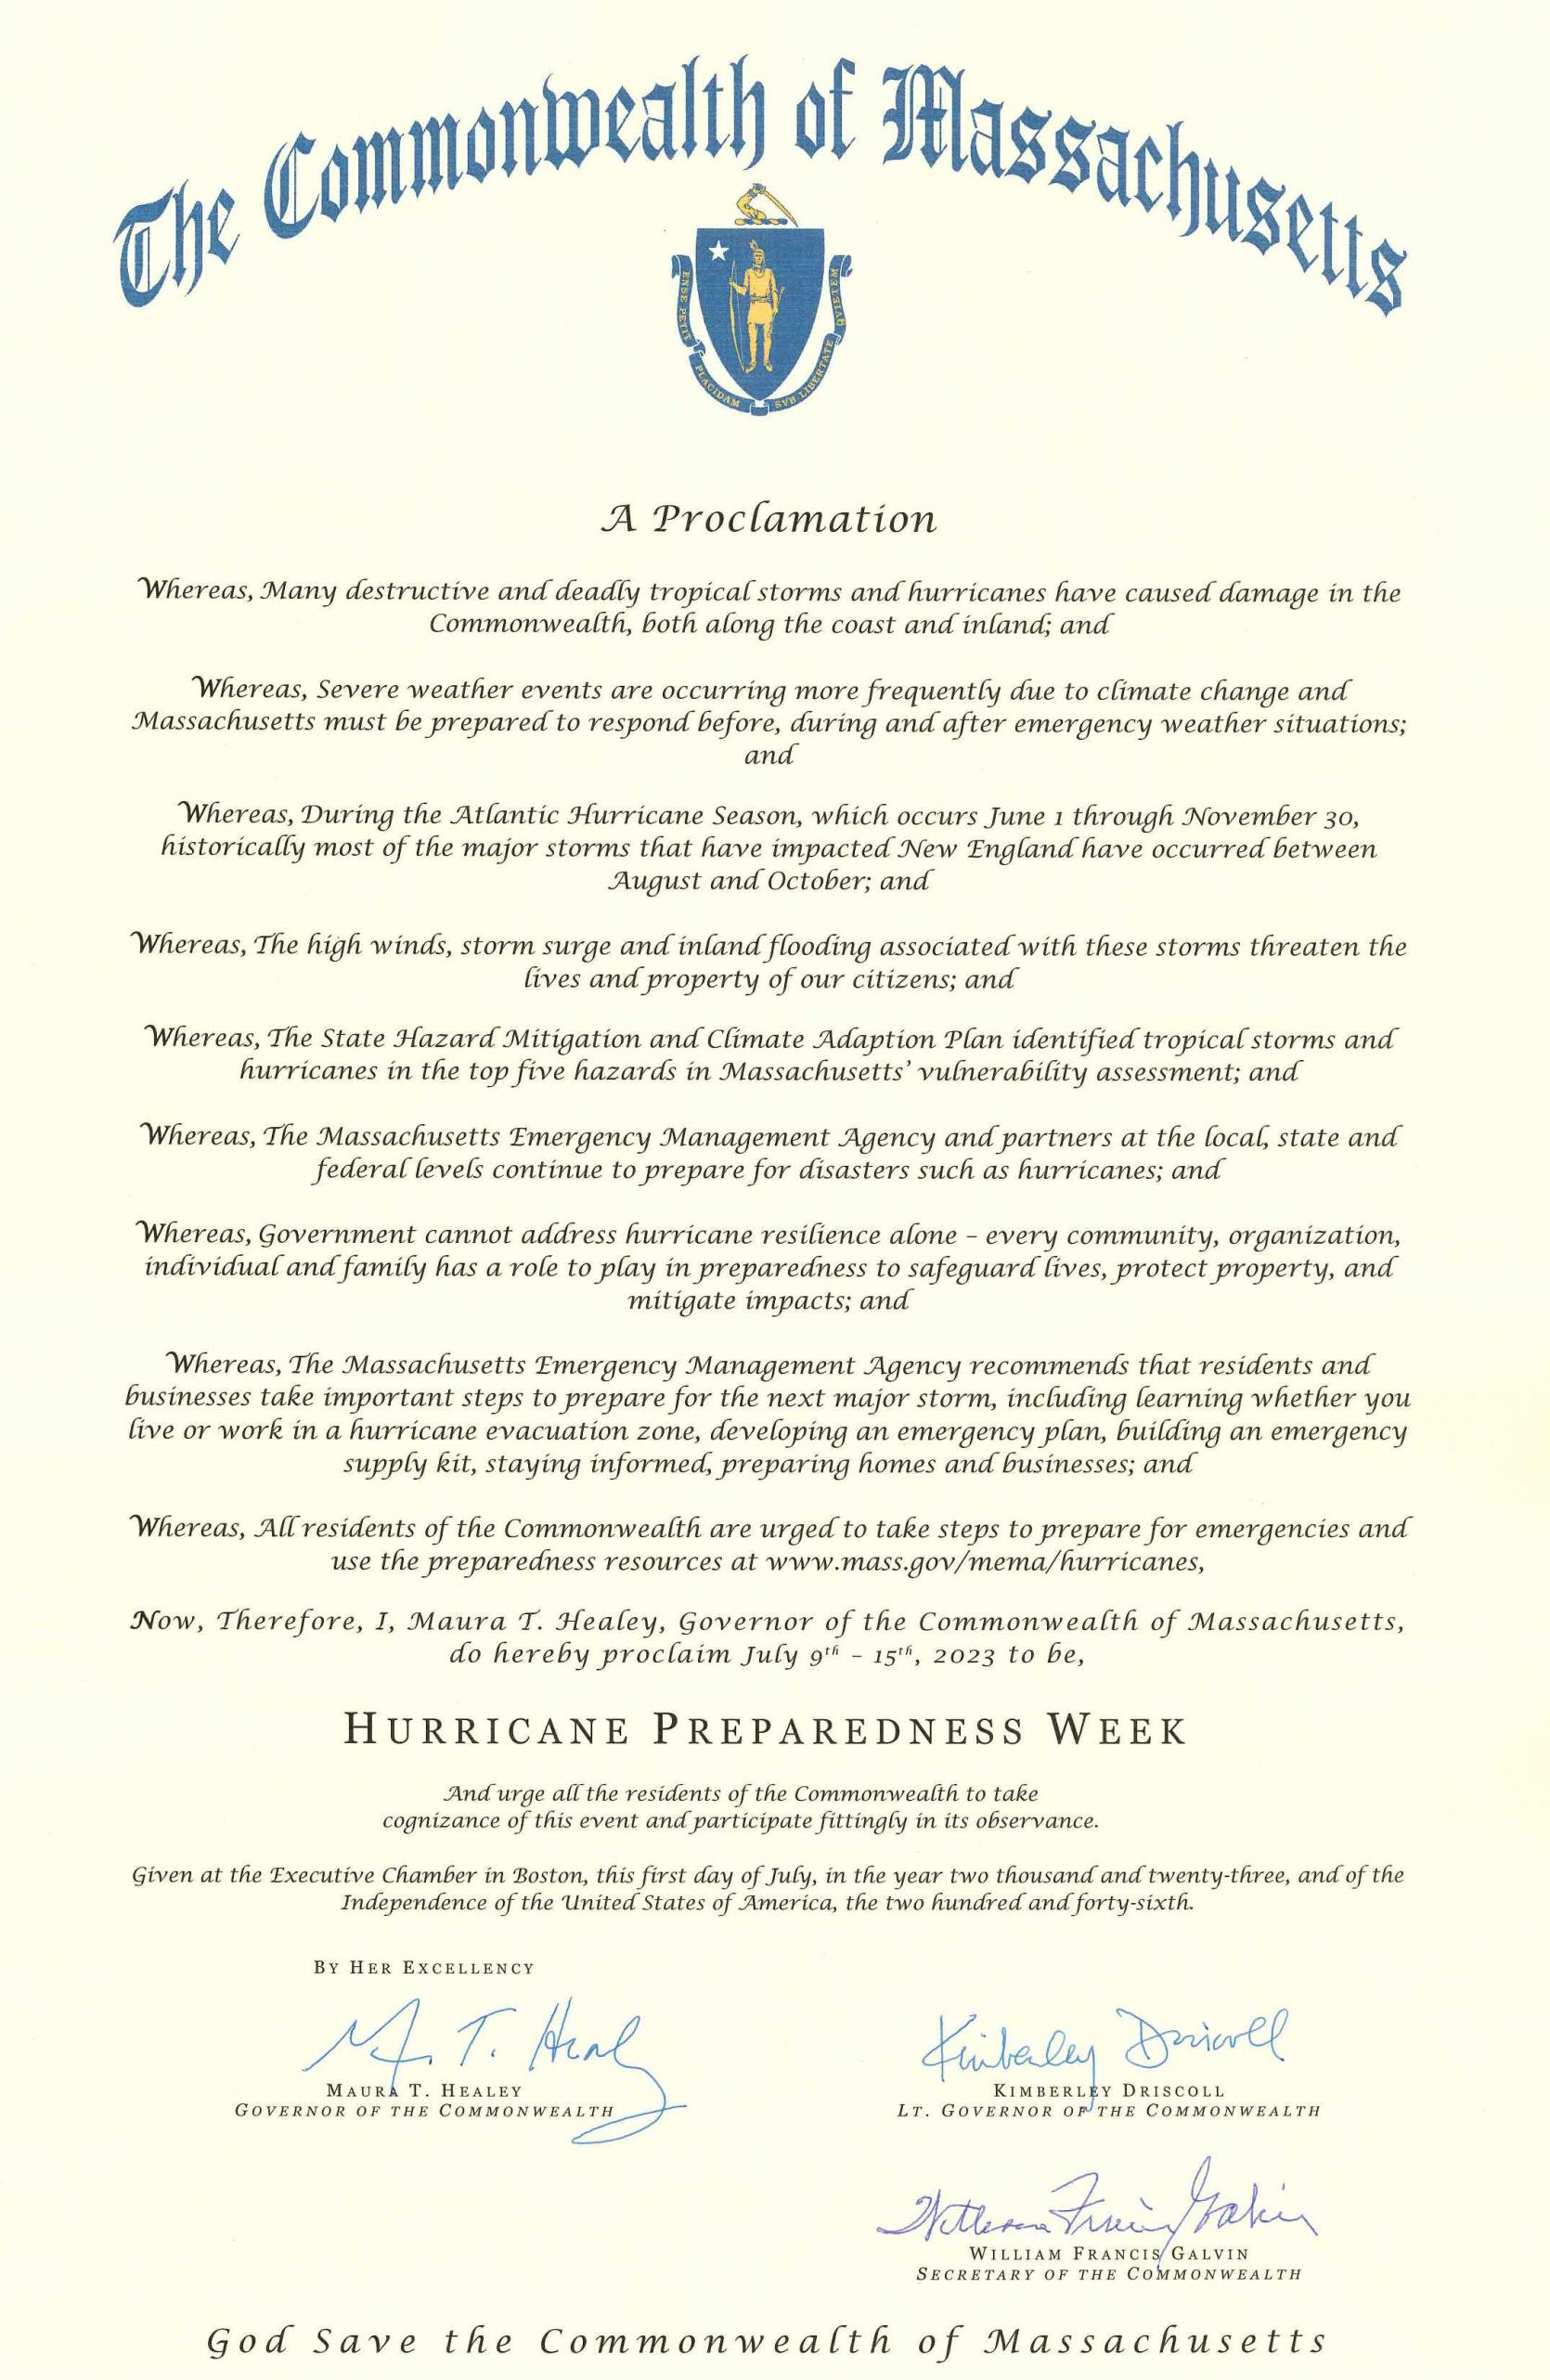 Hurricane Preparedness Week proclamation issued by Governor Maura Healey